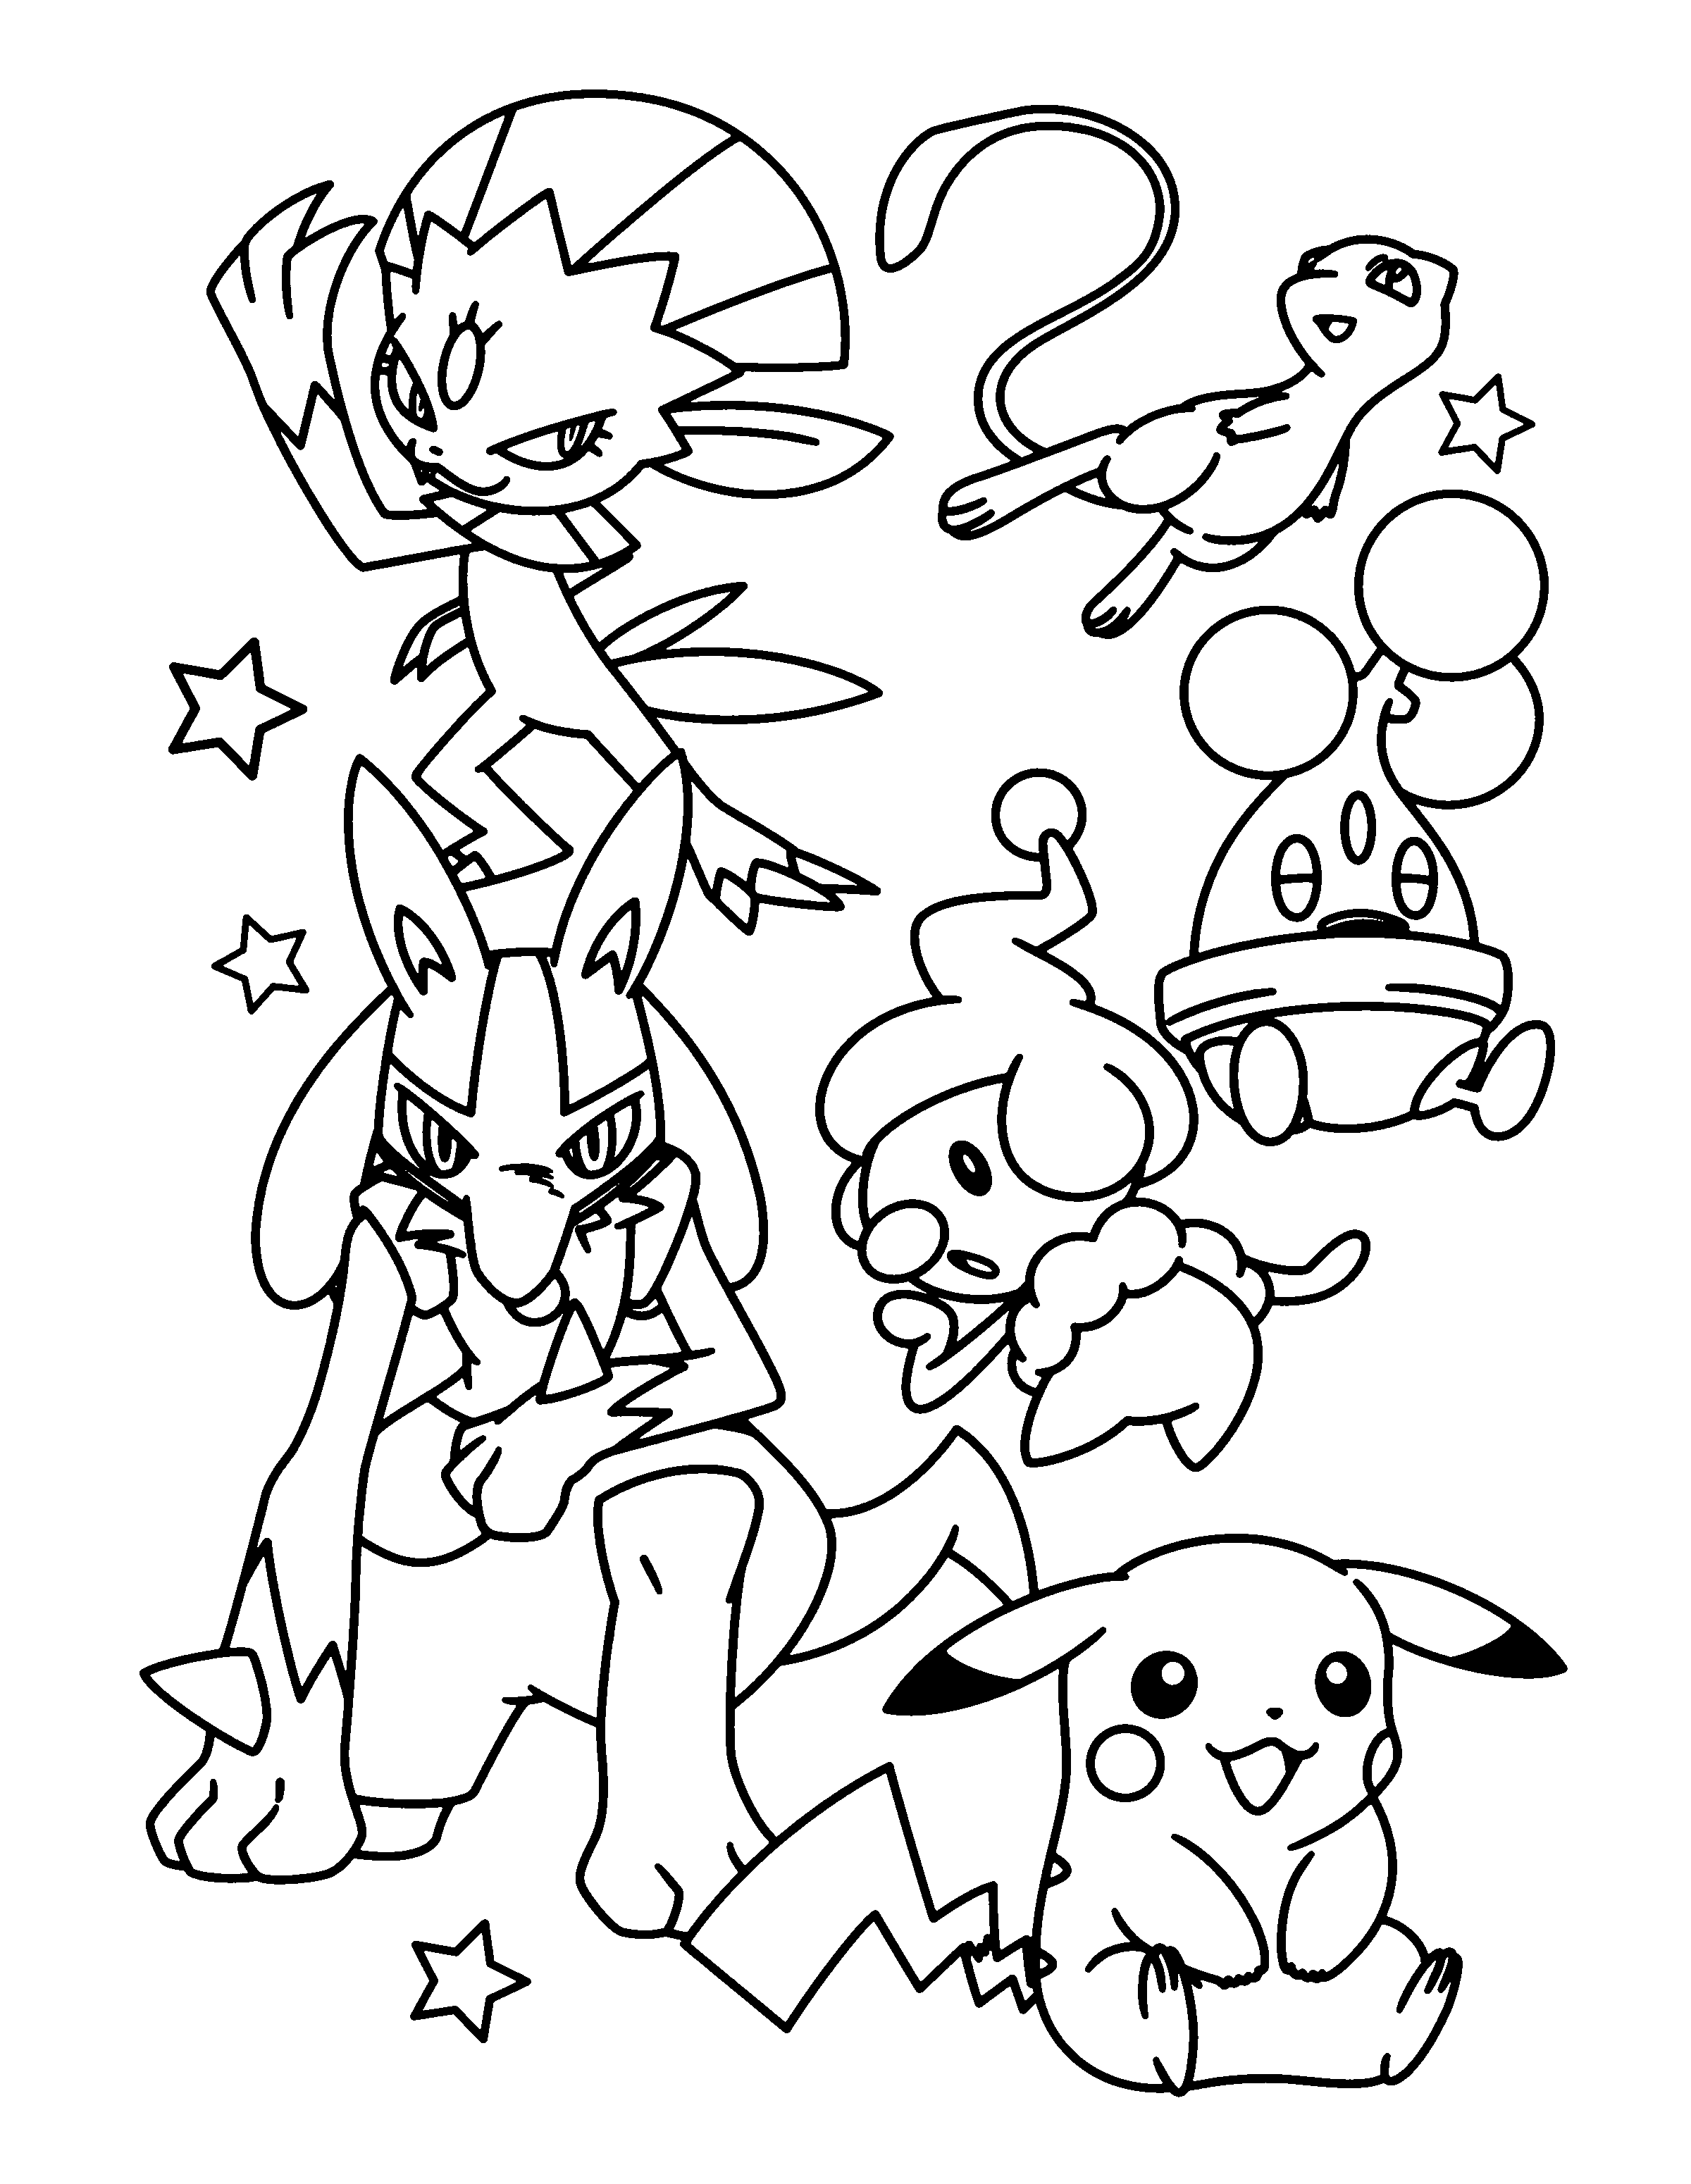 pokmon coloring pages pokemon coloring pages join your favorite pokemon on an pages pokmon coloring 